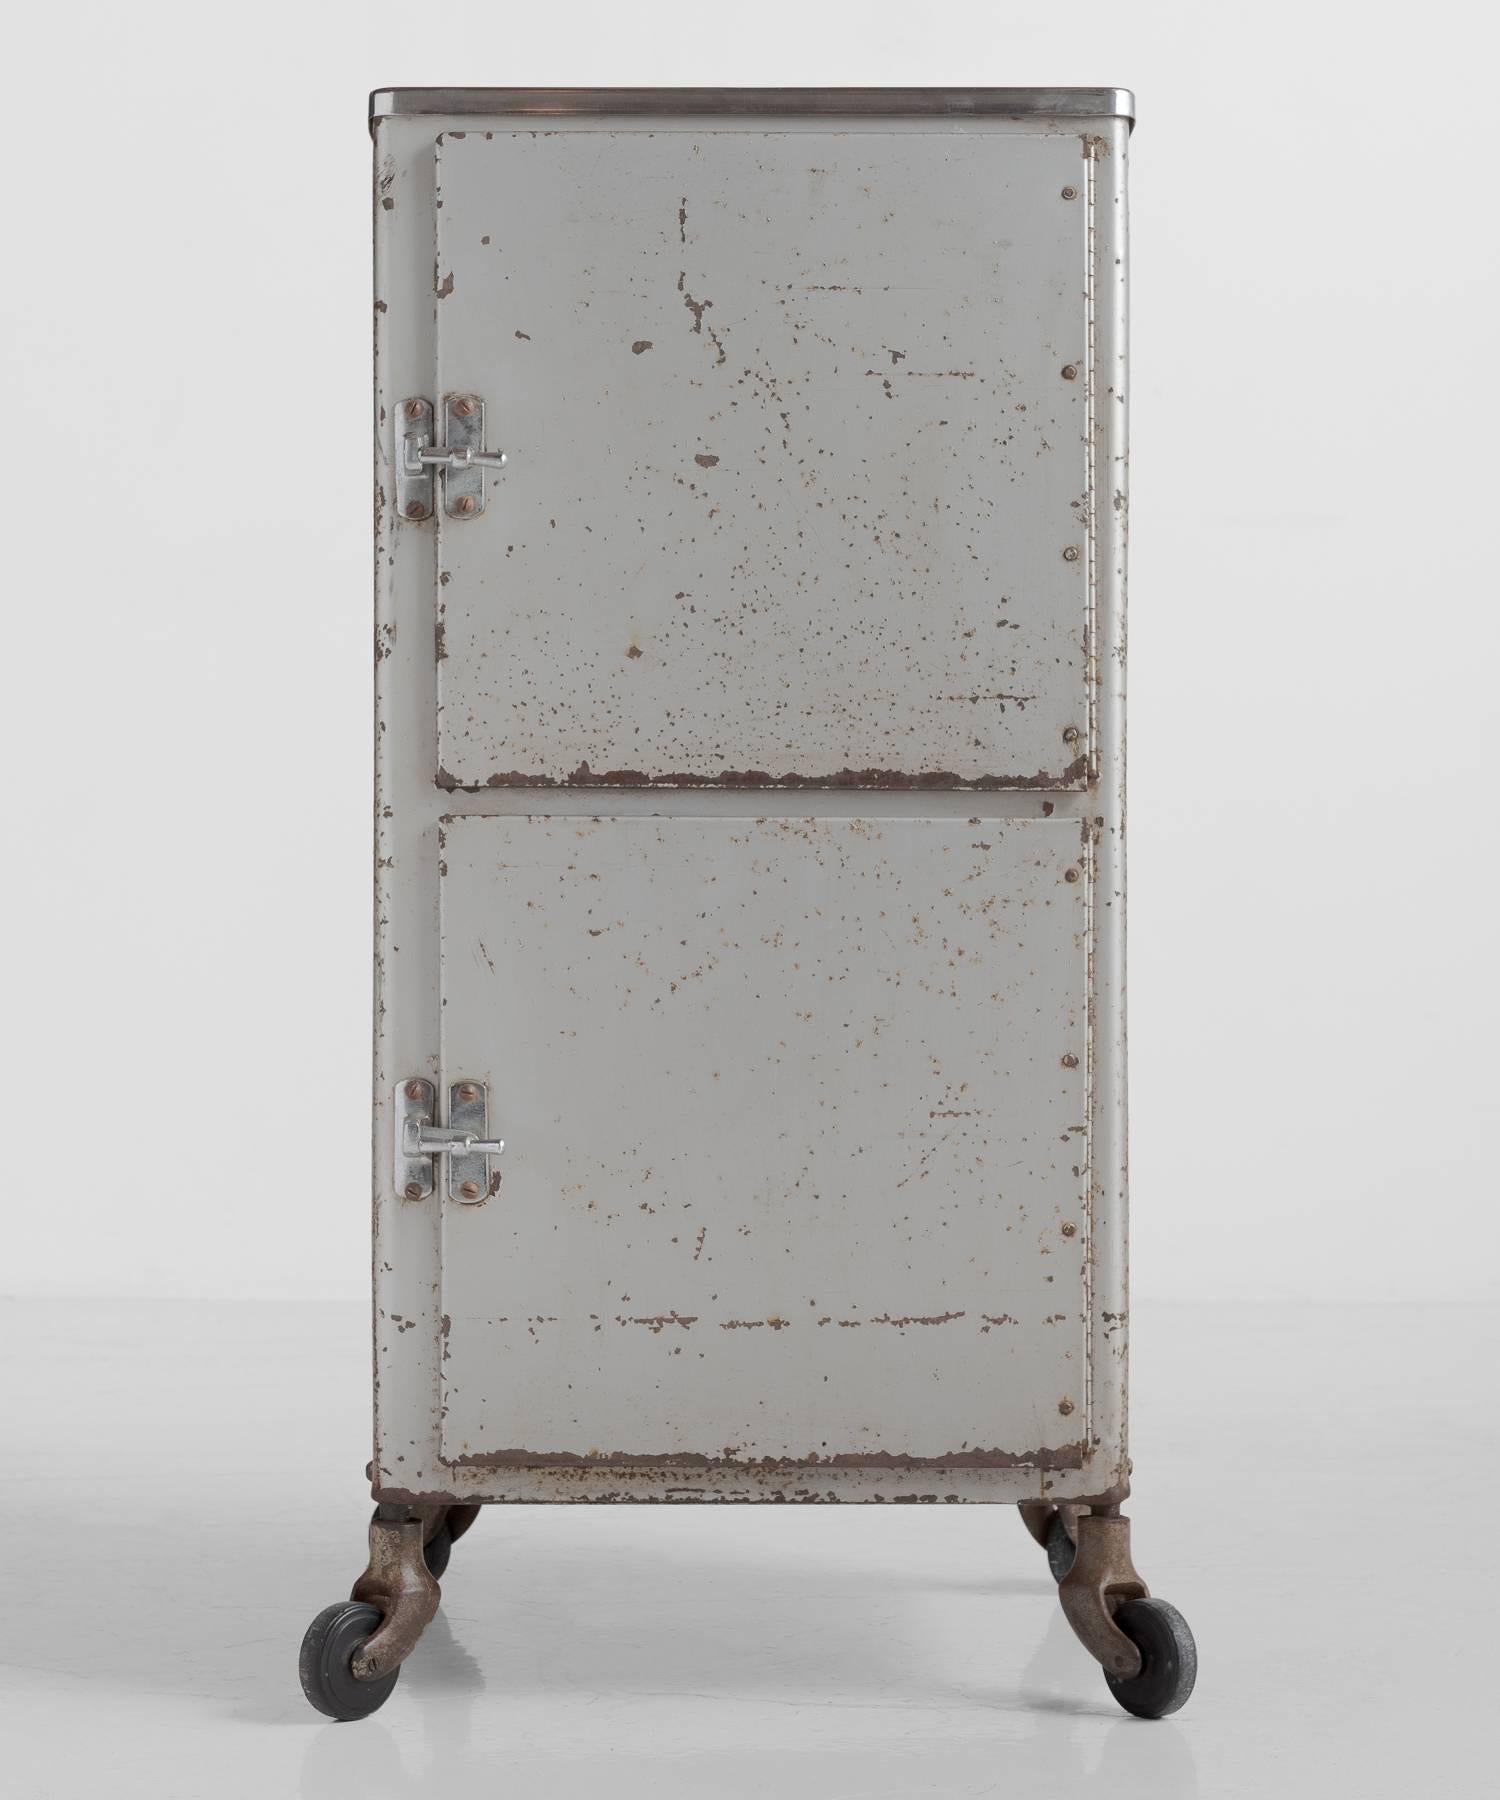 Hospital bedside cabinet, England, circa 1950

Pressed steel cabinet with chrome plate top and original worn and rusted exterior.